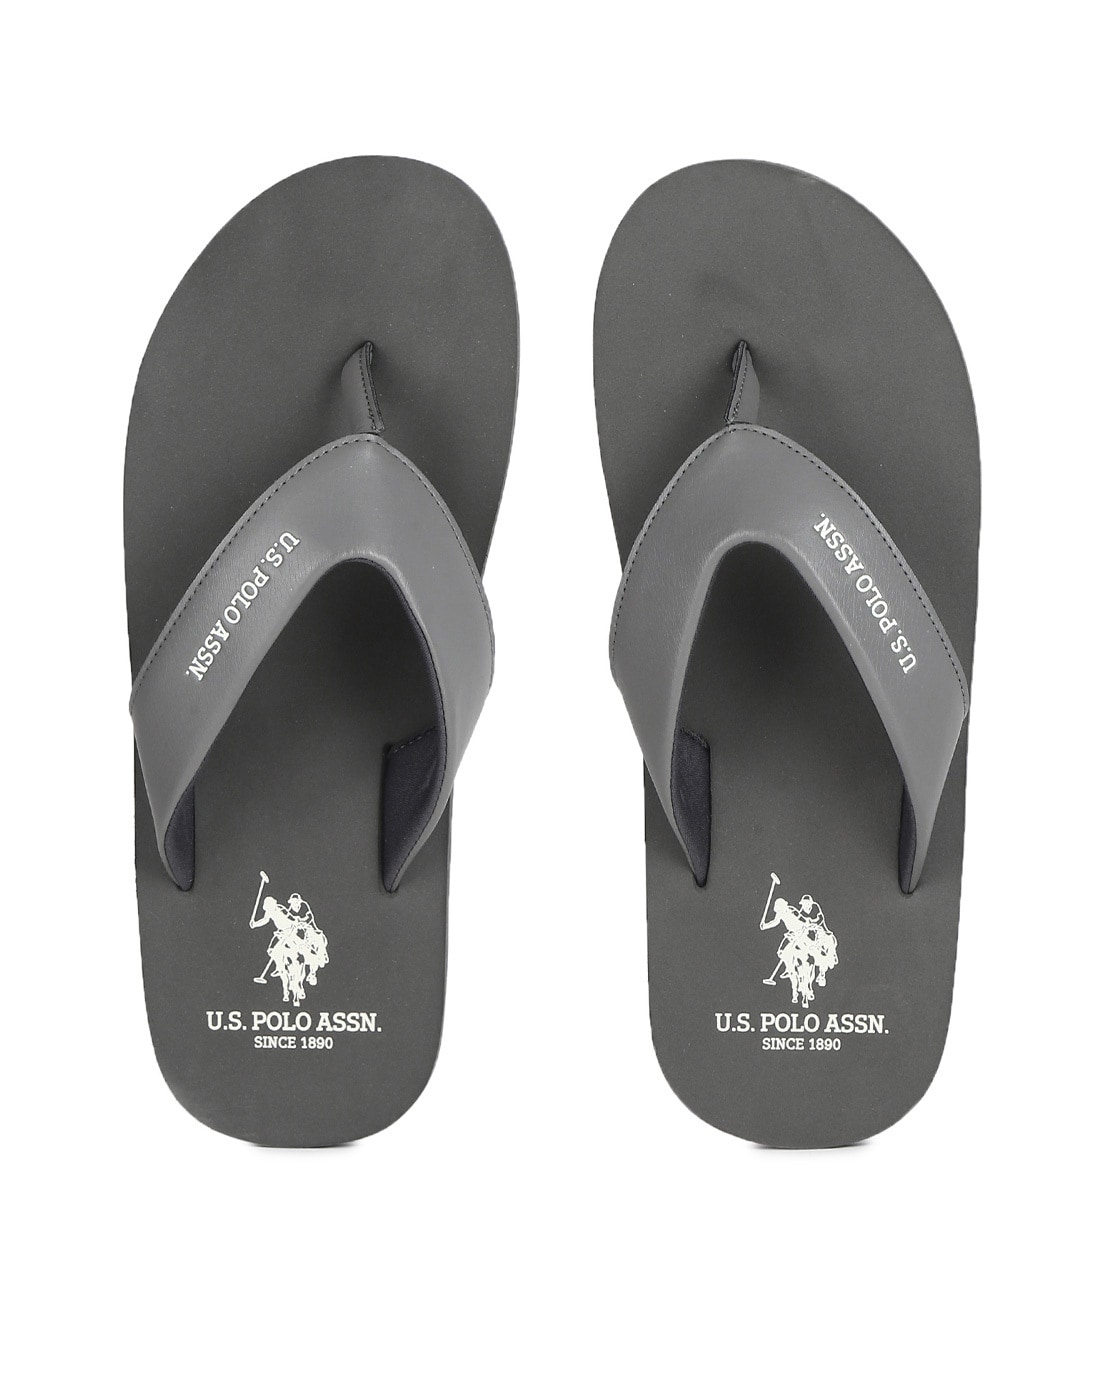 Discover more than 99 ajio slippers for mens best